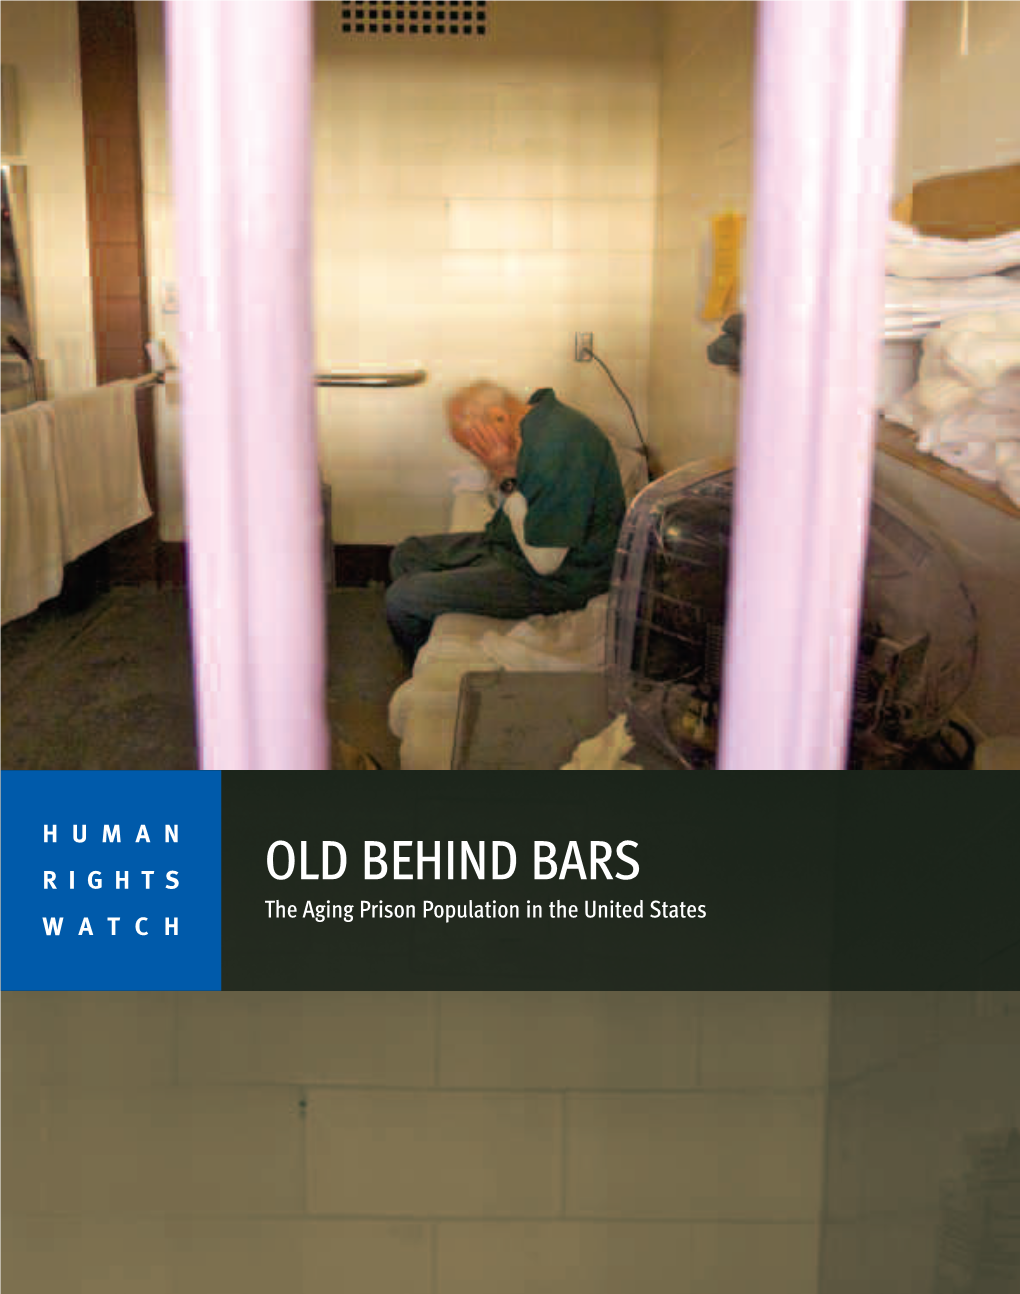 OLD BEHIND BARS the Aging Prison Population in the United States WATCH